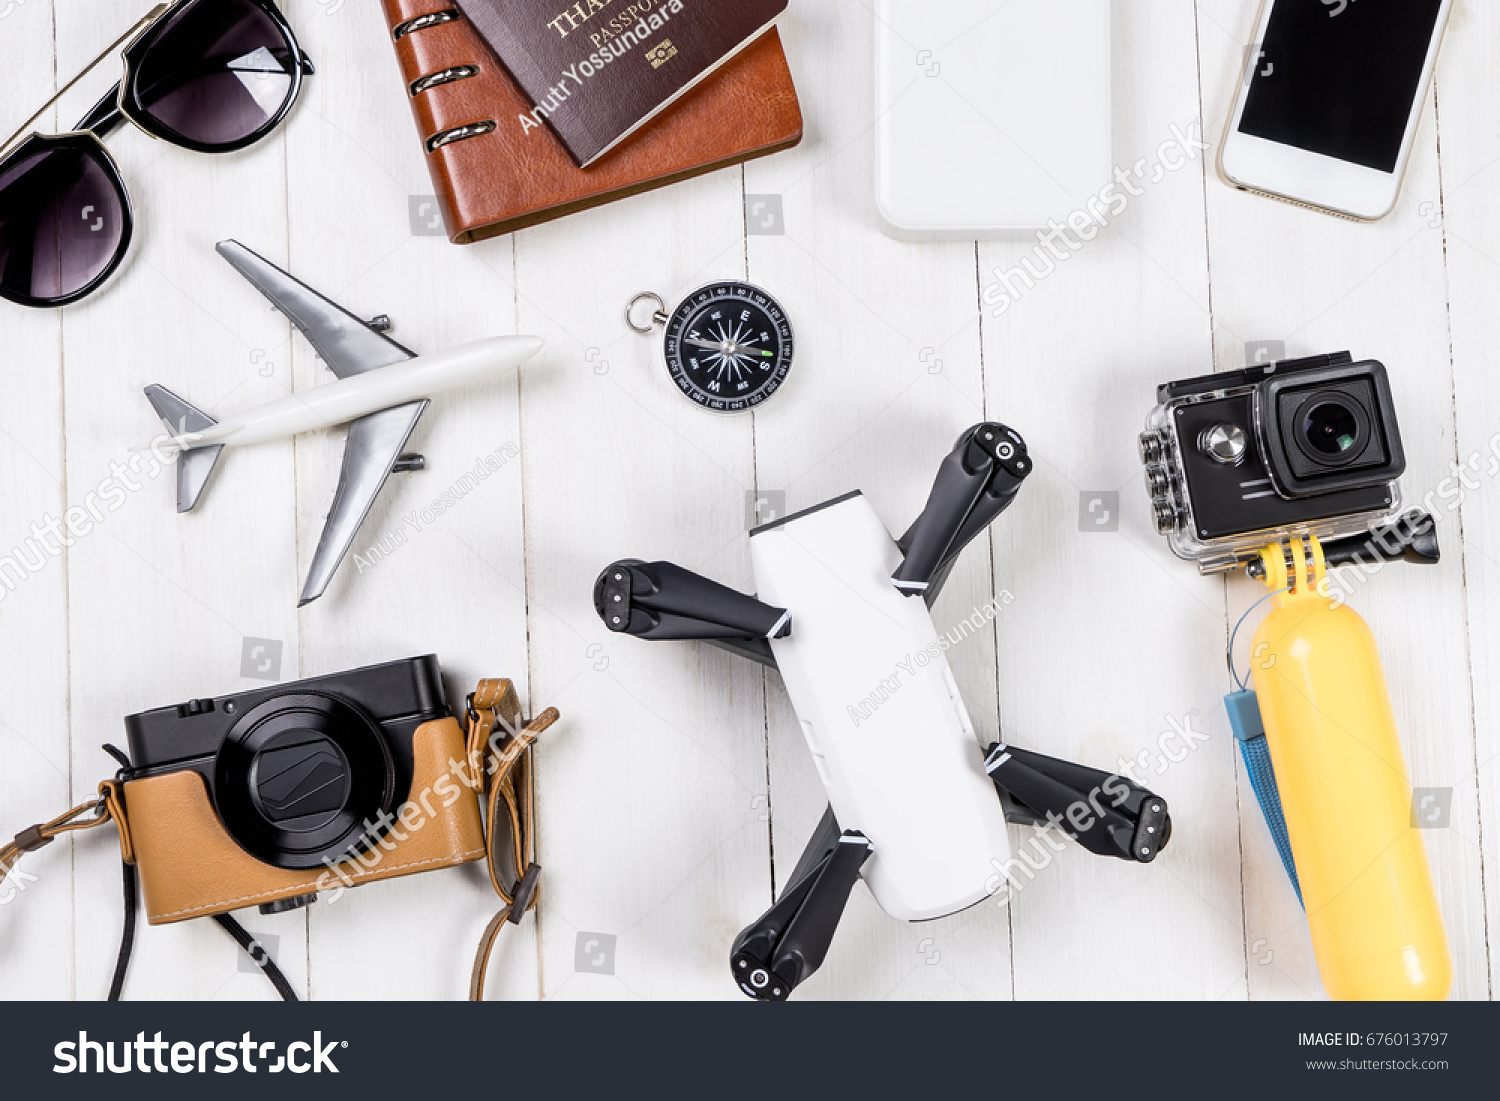 Travel objects and accessories on white wooden, Hi tech gadgets for vacation travel Vlogger and blogger Photography and video footage equipments concept. #676013797